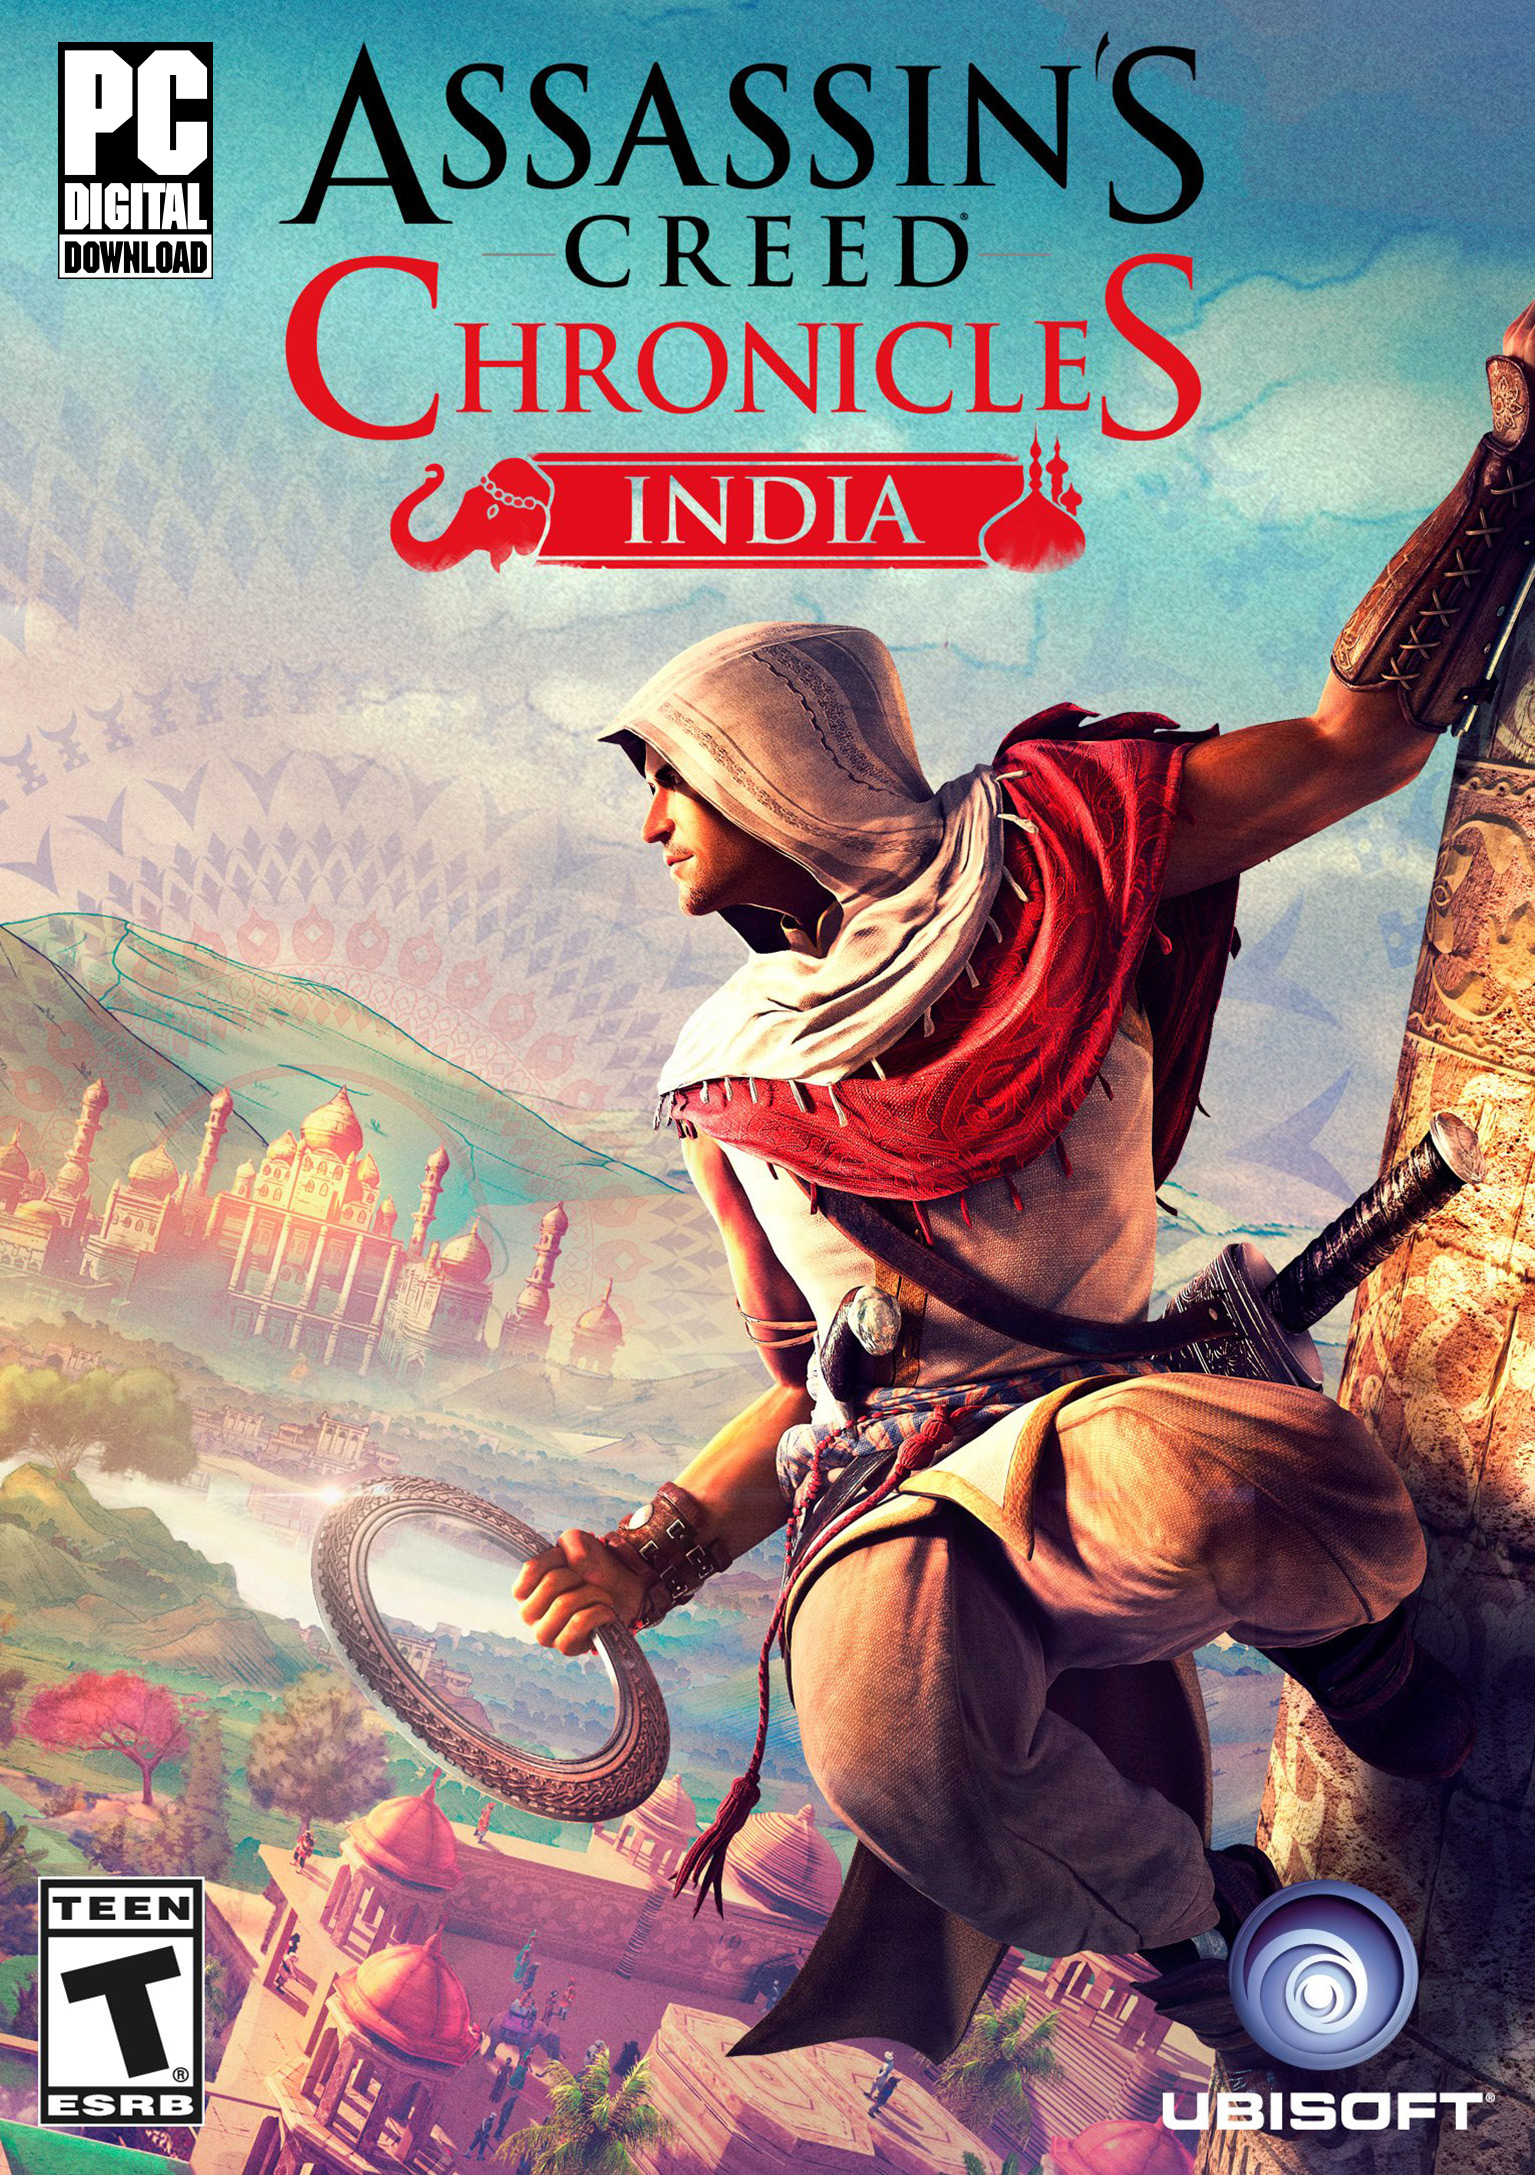 Assassin's Creed Chronicles: India - predn DVD obal